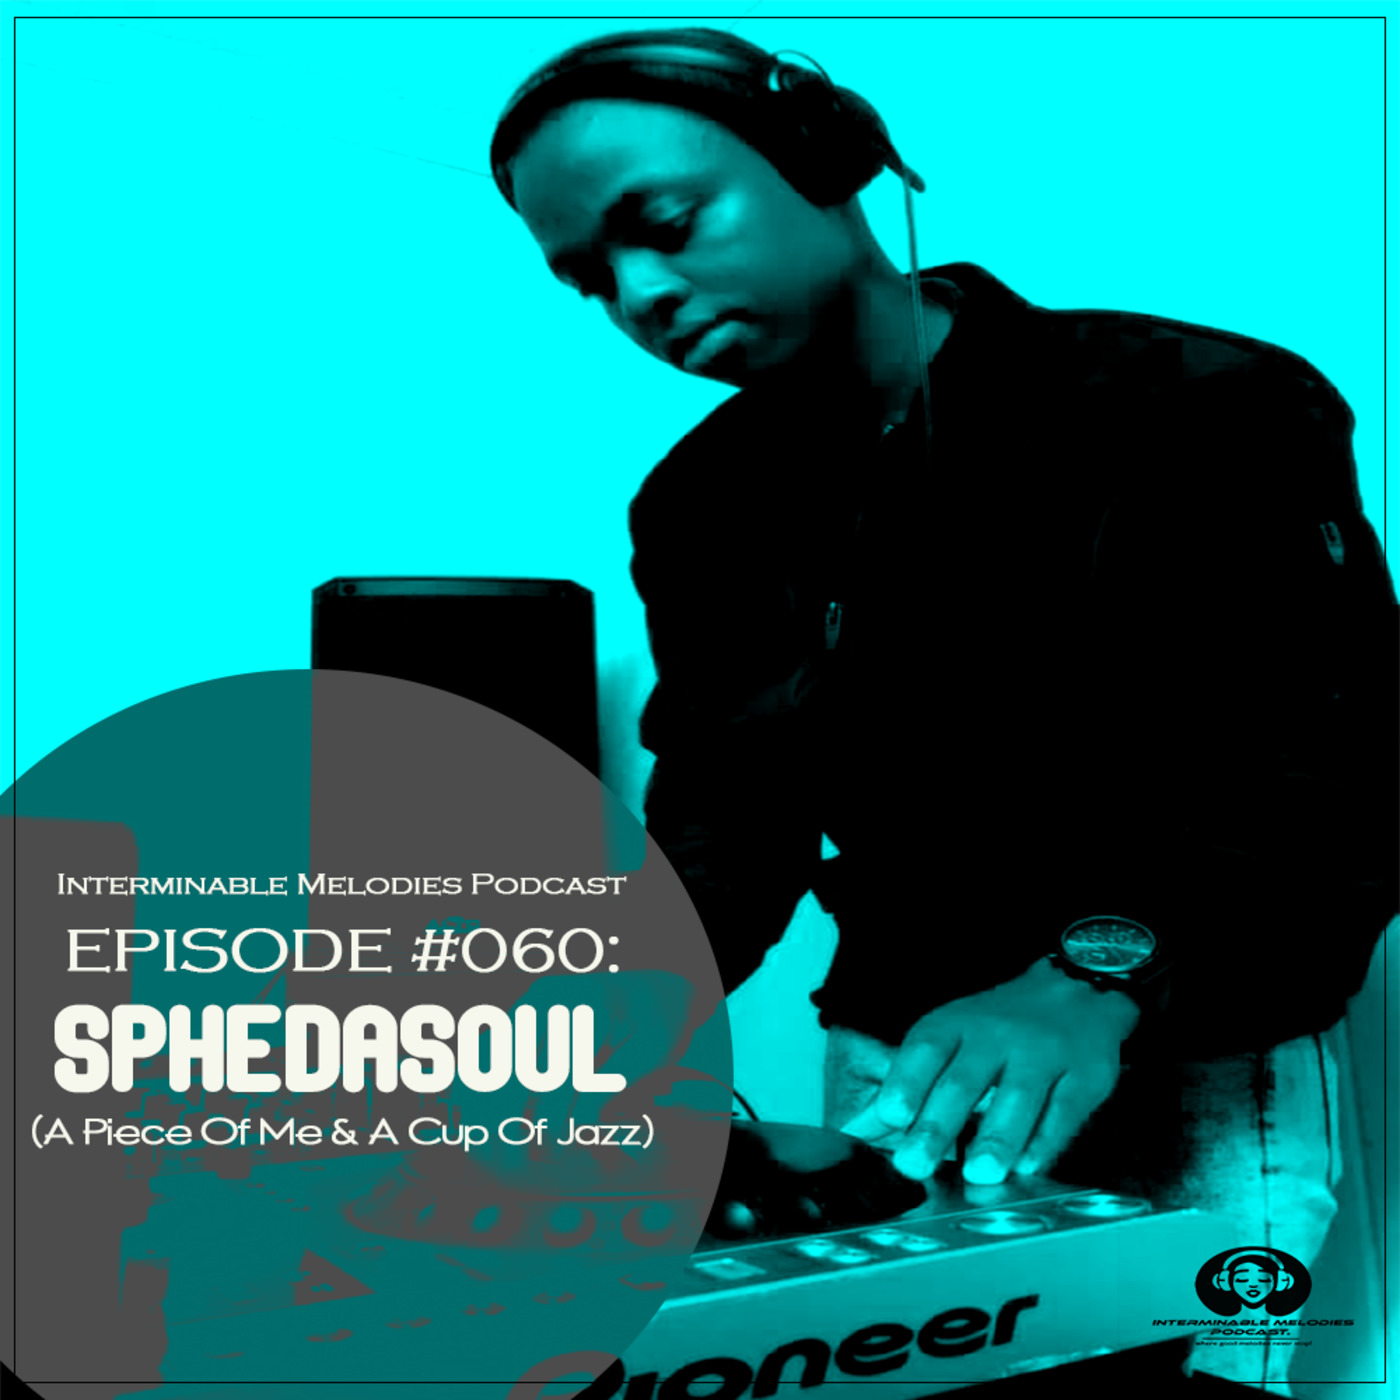 IMP - Episode #060 Guest Mix By Sphedasoul (A Piece Of Me & A Cup Of Jazz)